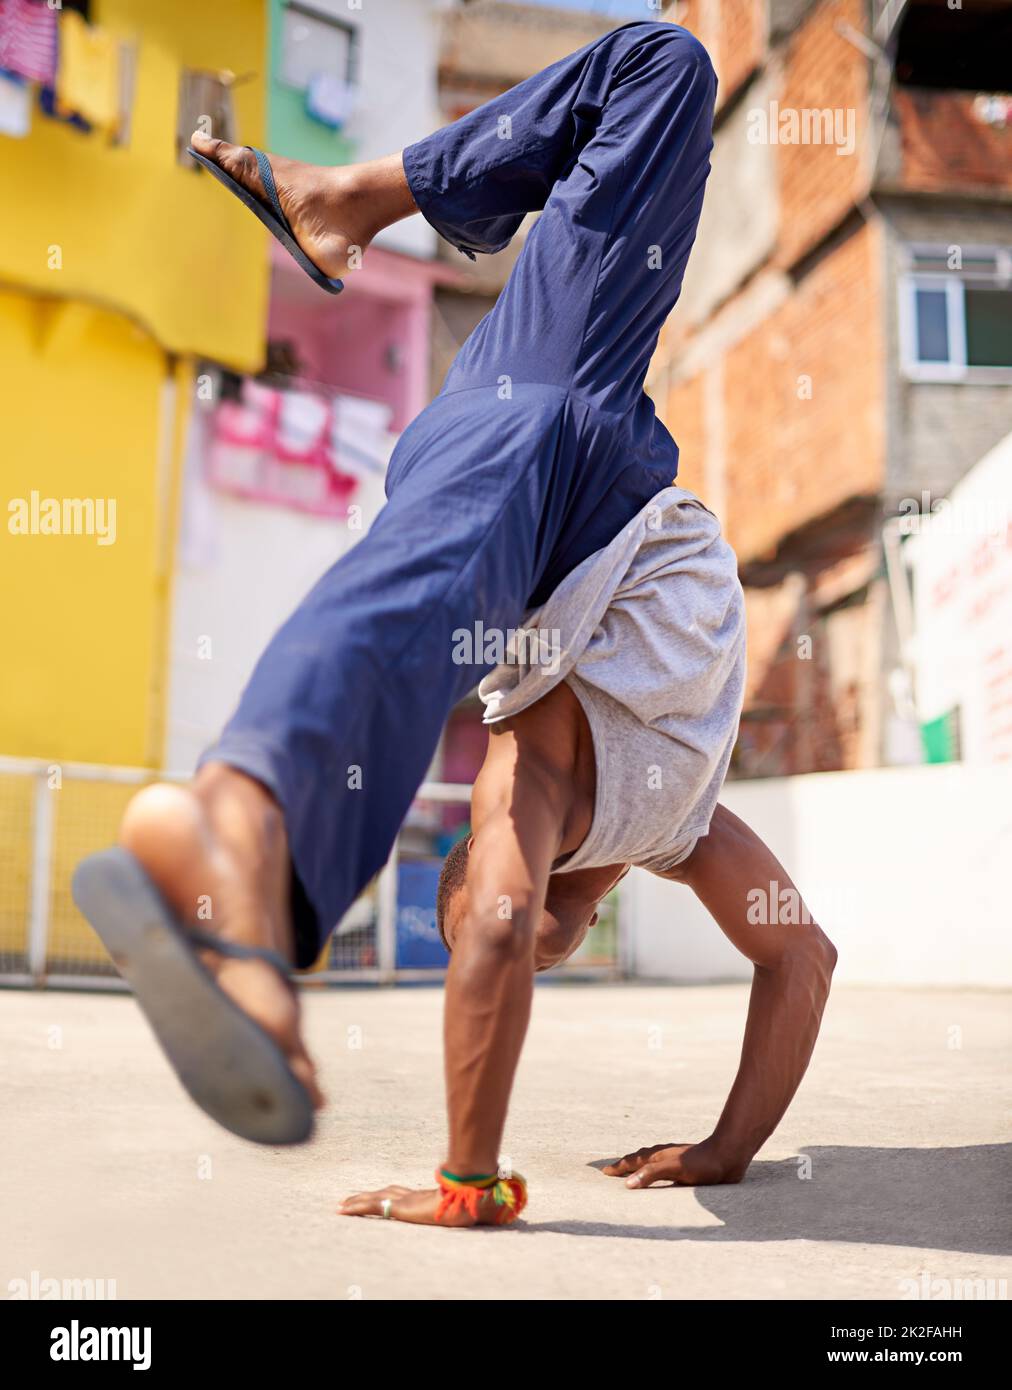 Street style. Low angle shot of a young male breakdancer in an urban setting. Stock Photo